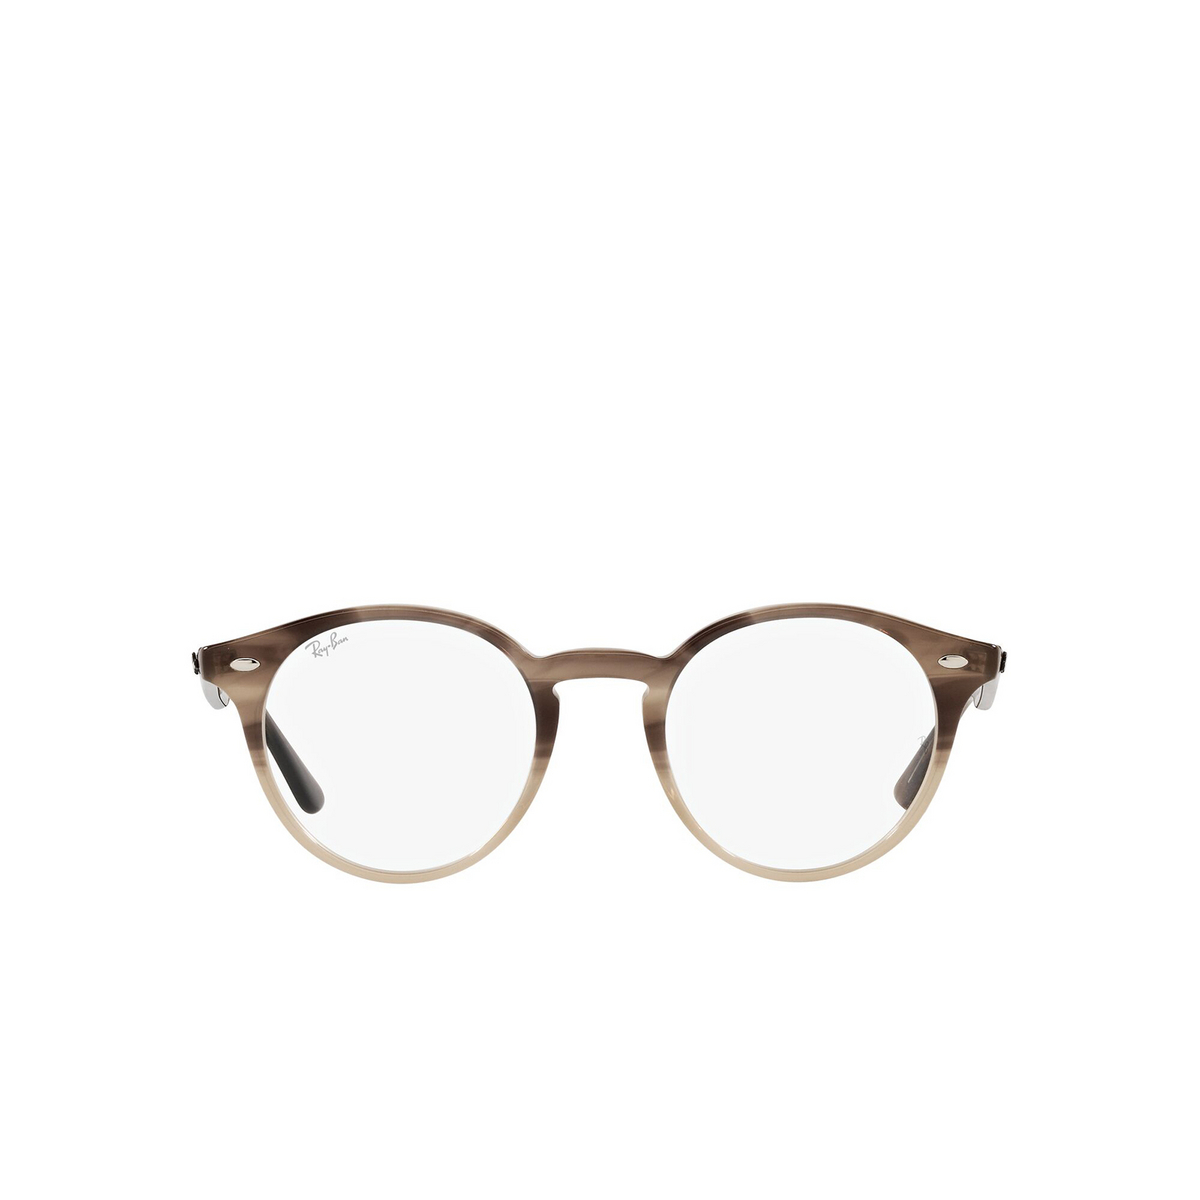 Ray-Ban® Round Eyeglasses: RX2180V color Gradient Brown Havana 8107 - front view.